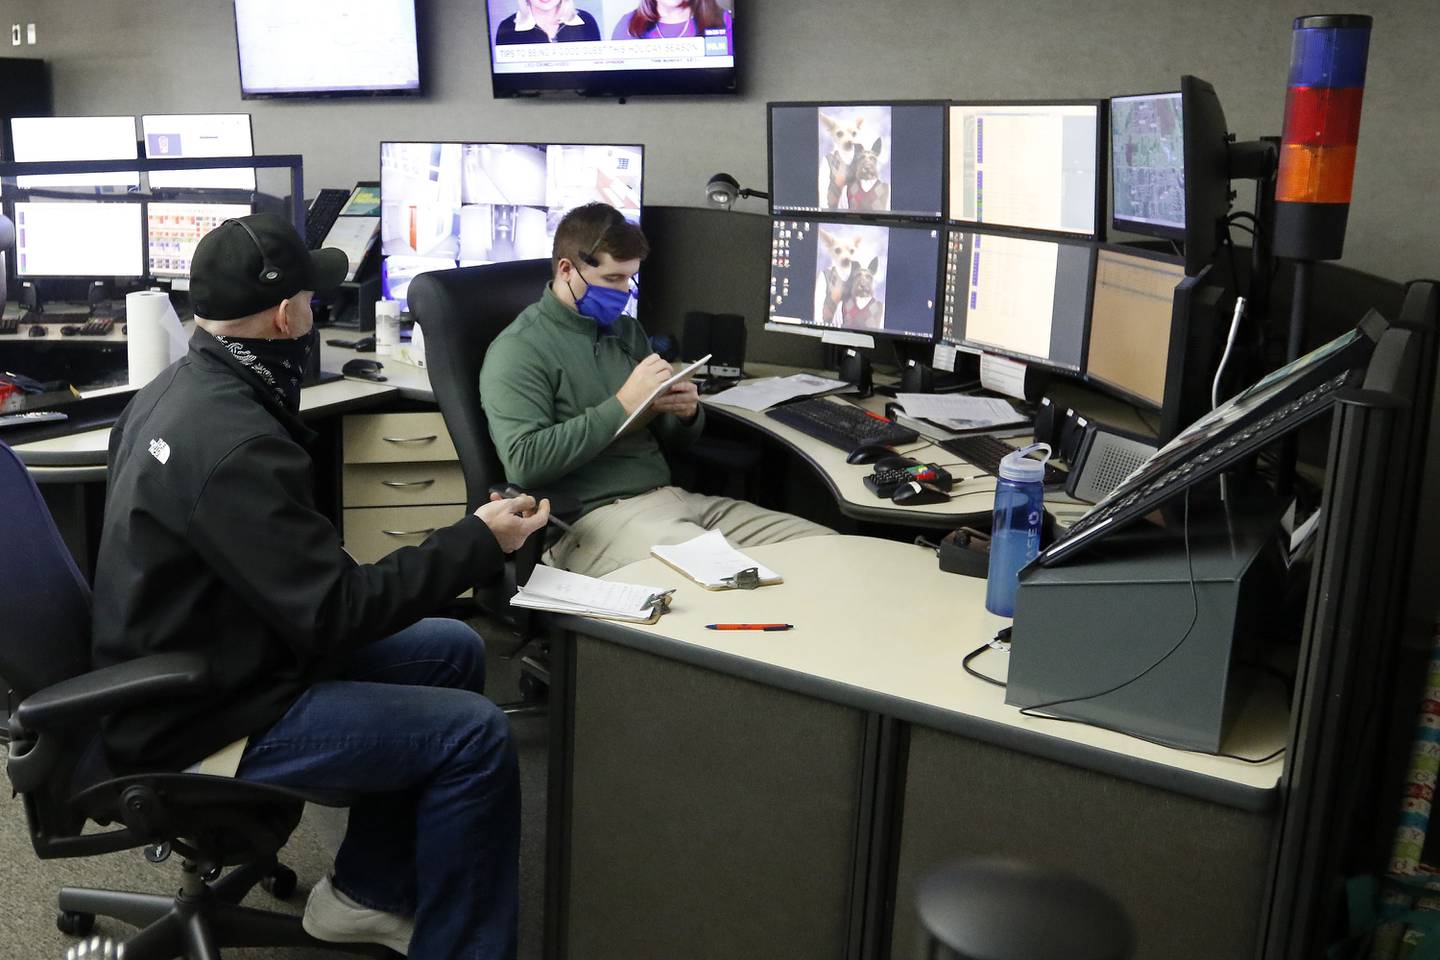 SEECOM telecommunicator trainer Mike Jurkowski, left, works with Jim Epley on the phones and computer systems that connect 911 calls to first responders on Wednesday, Dec. 22, 2021, at Aaron T. Shepley City Hall in Crystal Lake.